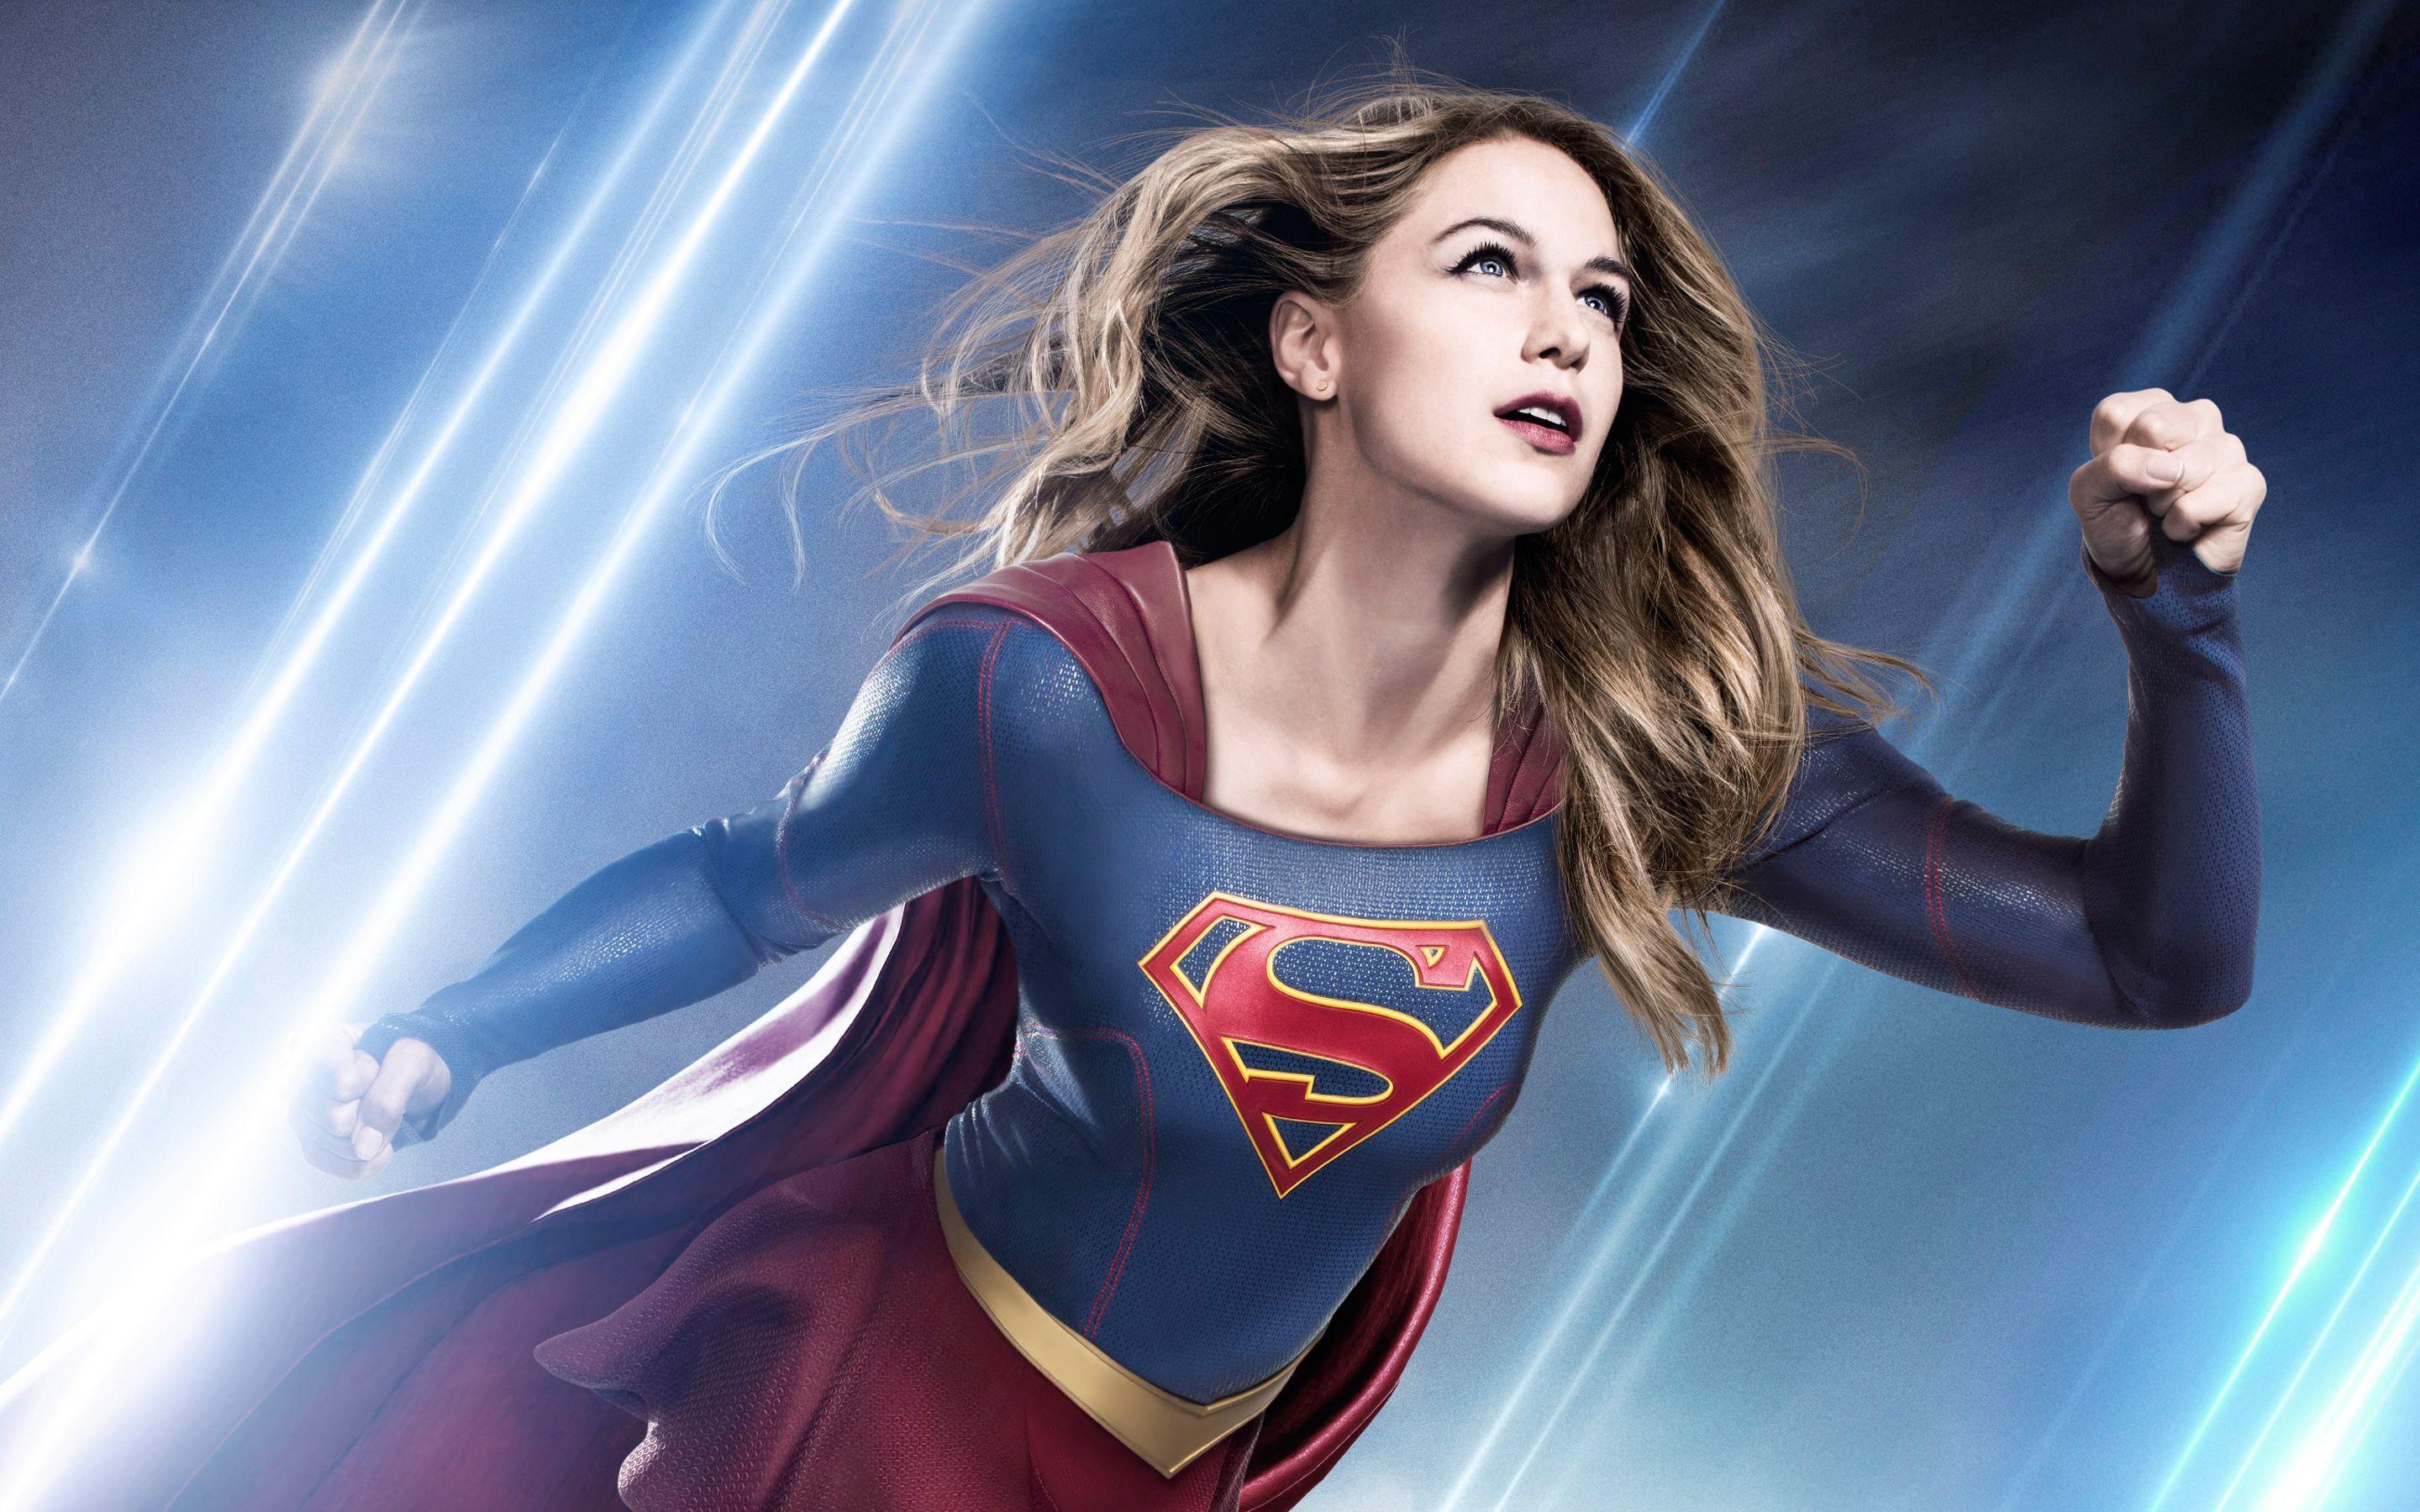 supergirl season 3 HD wallpaper. SUPERGIRL / CW shows in 2019